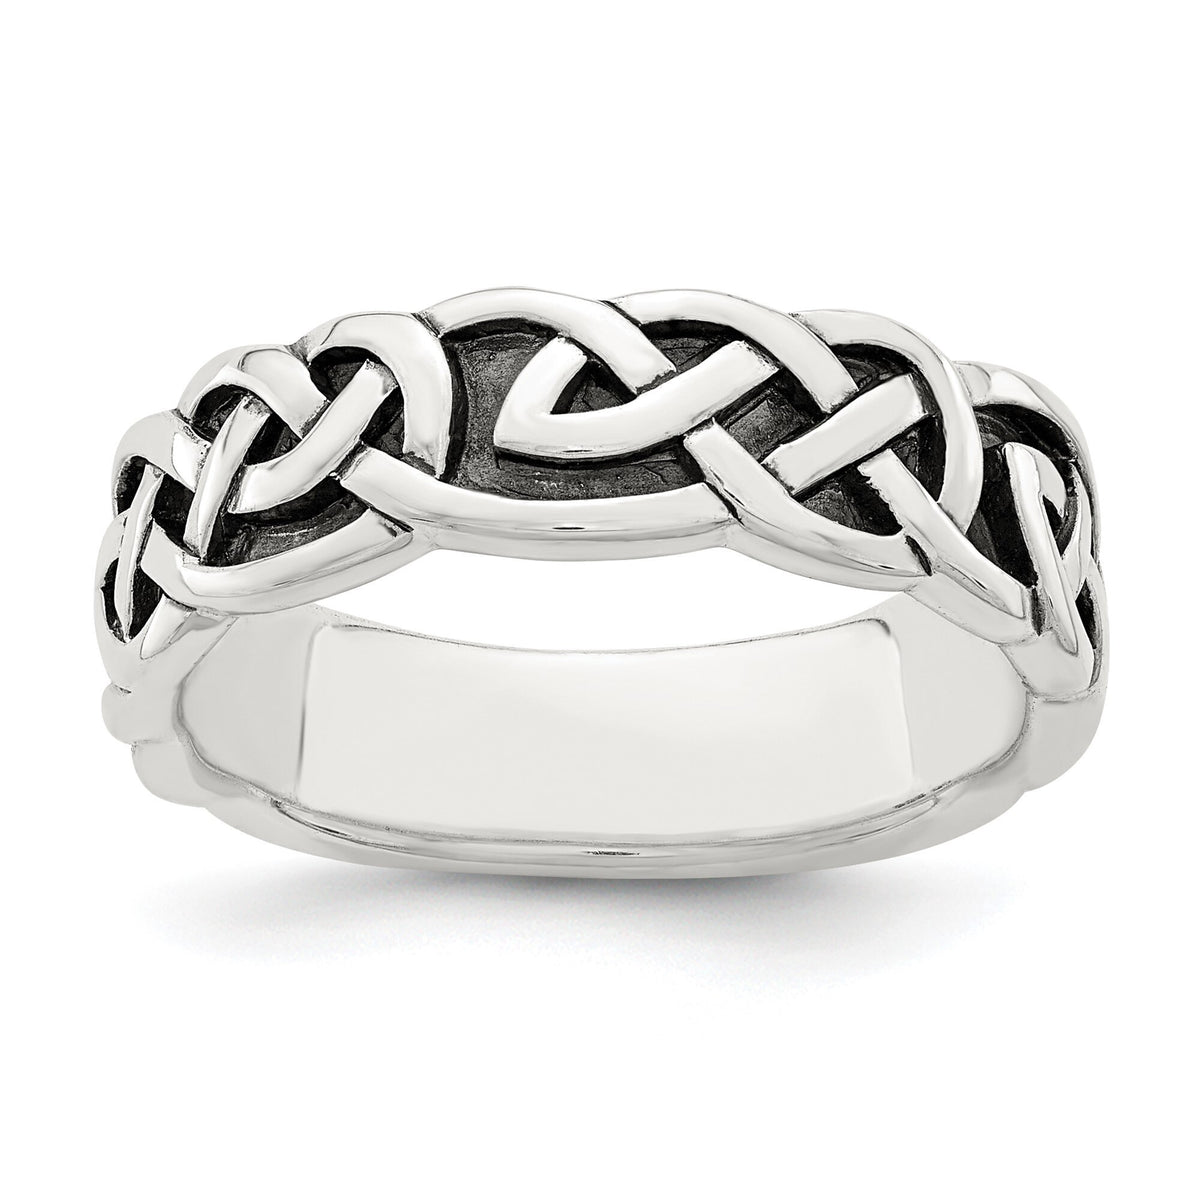 Womens Antiqued Celtic Knot Band Ring in Sterling Silver Claddagh Ring Sizes 6-8 -Gift Box Included